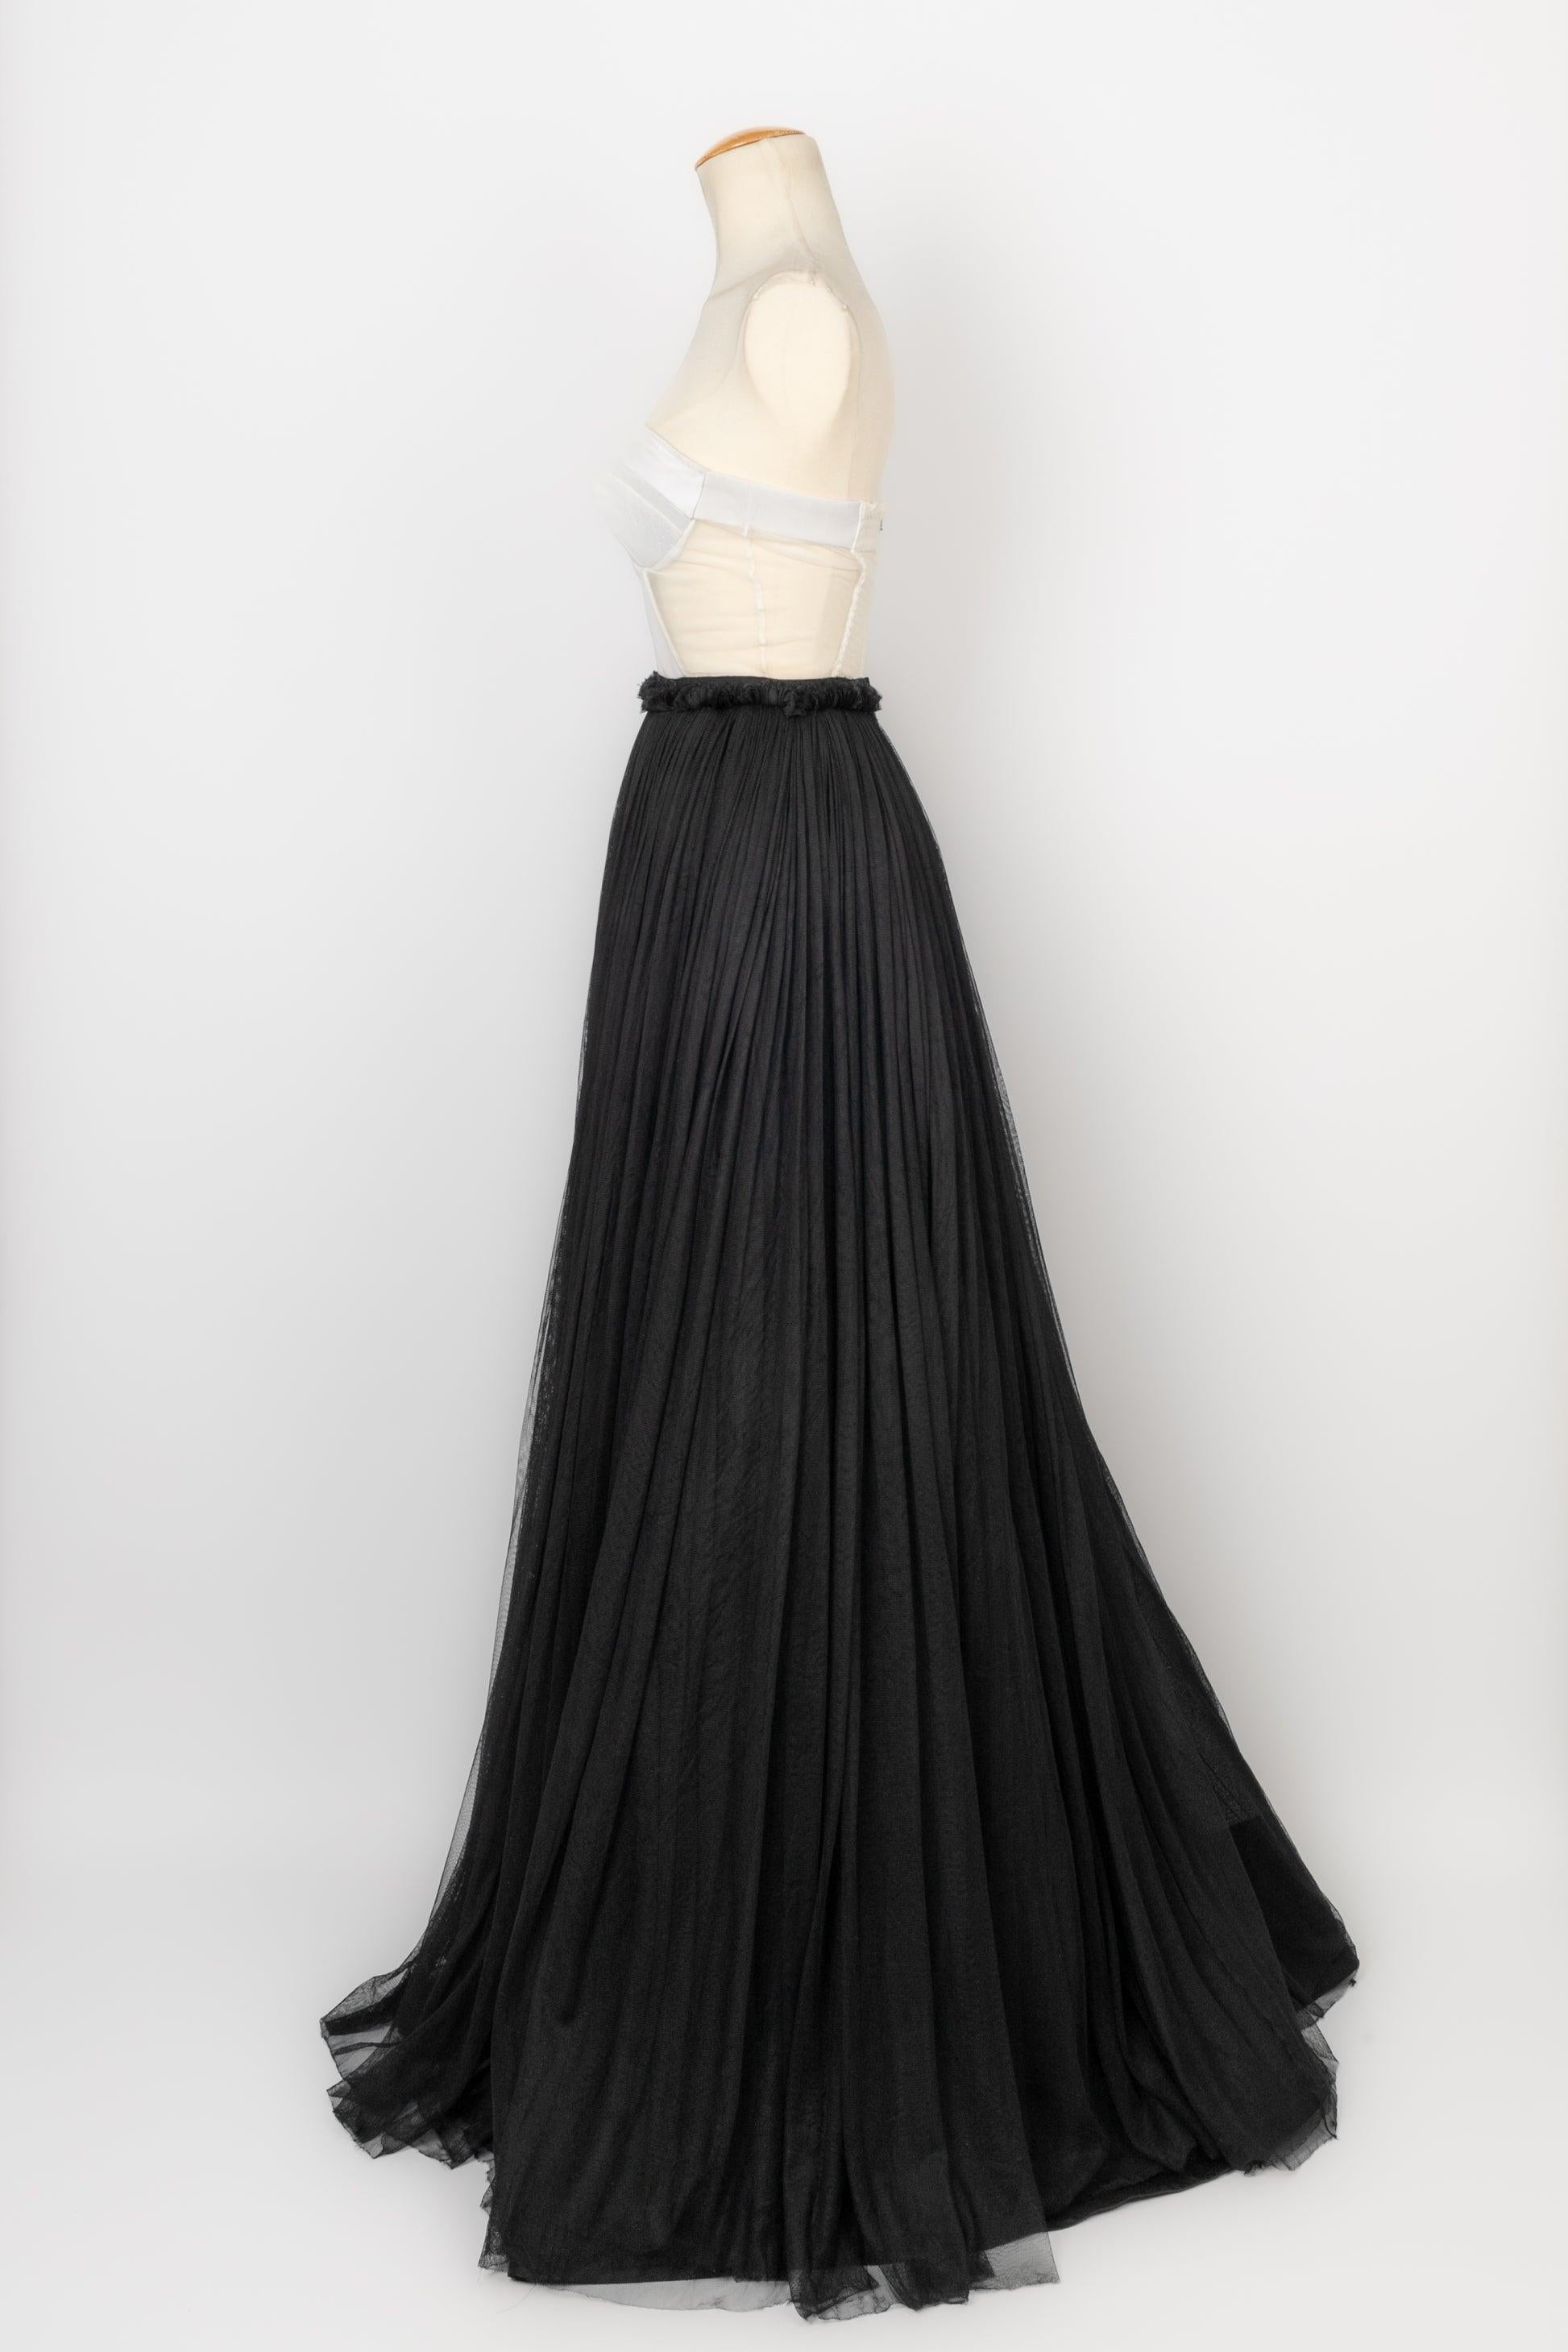 Paule Ka - Maxi dress composed of a white fishnet bustier top and a black tulle skirt. Size 38FR.

Additional information:
Condition: Good condition
Dimensions: Chest: 35 cm - Waist: 30 cm - Length: 150 cm

Seller Reference: VR290